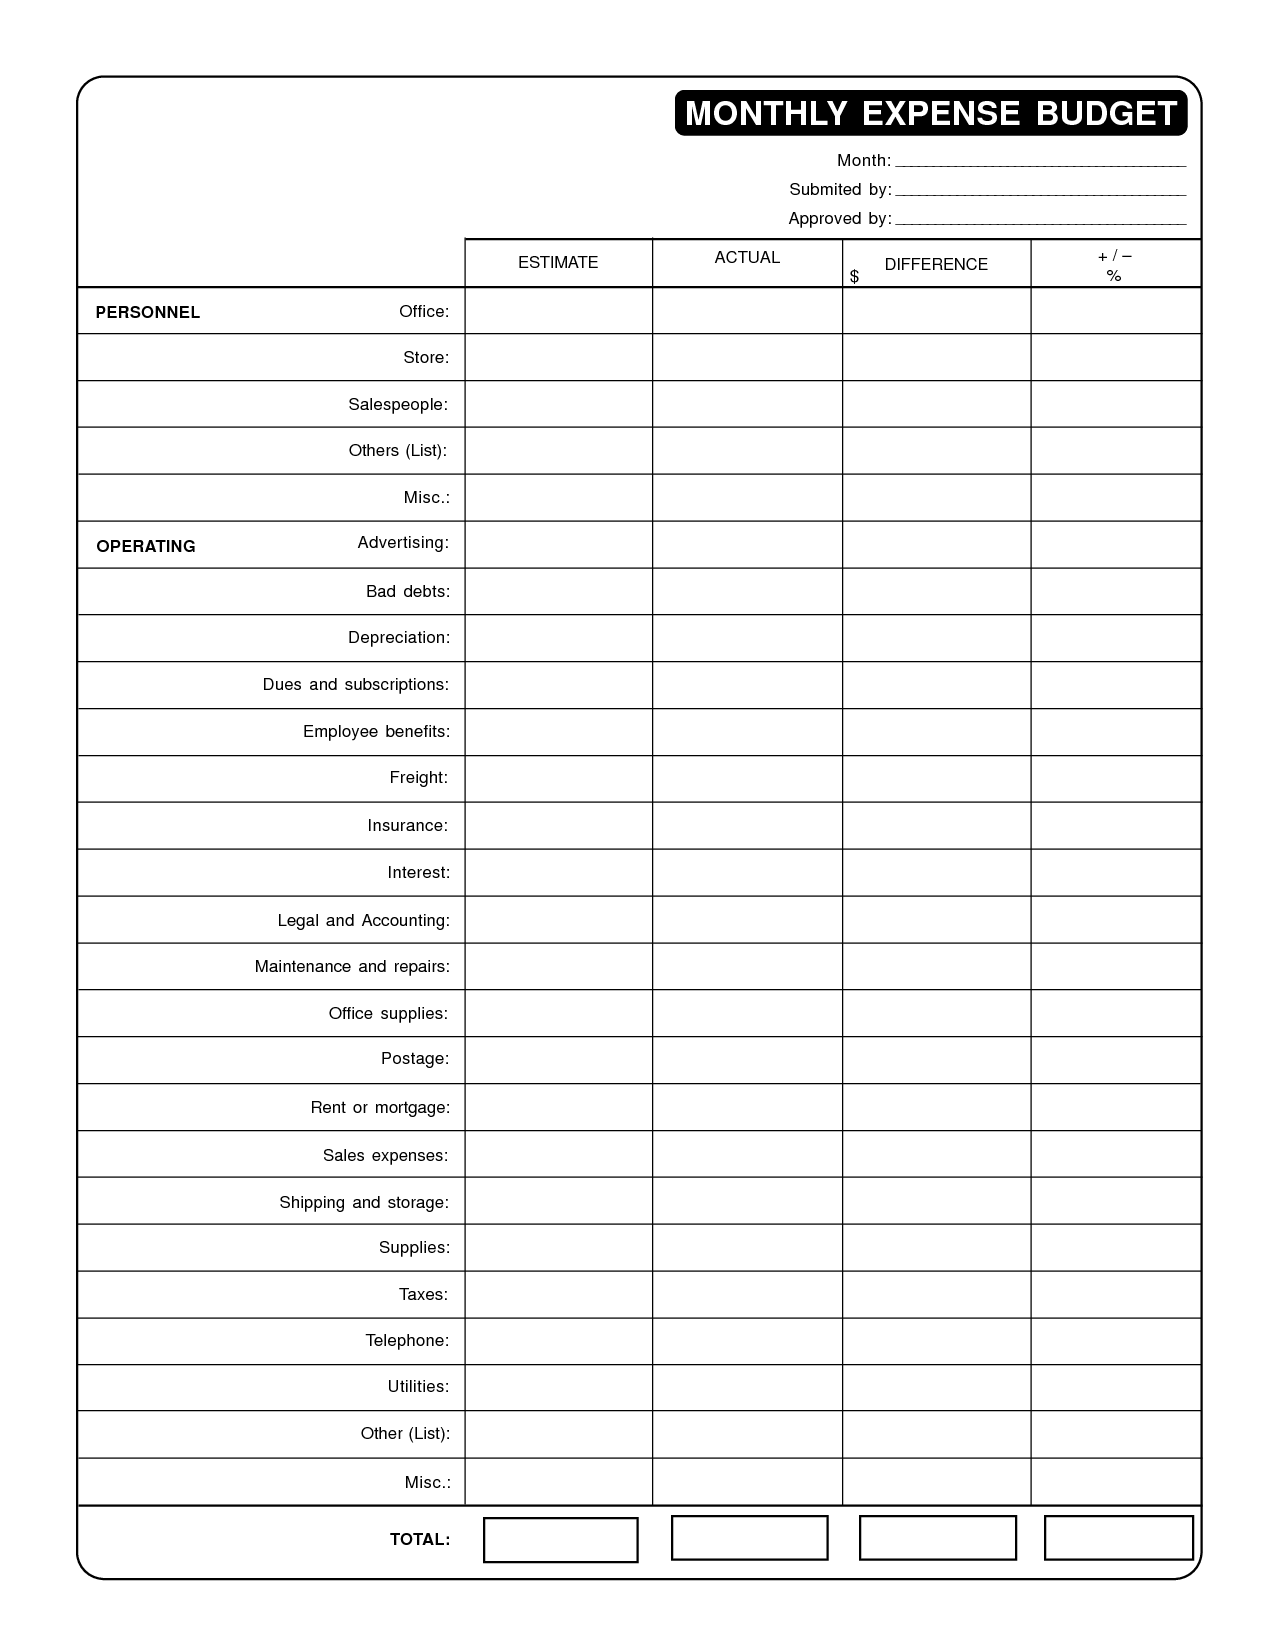 15-best-images-of-monthly-budget-calculator-worksheet-student-monthly